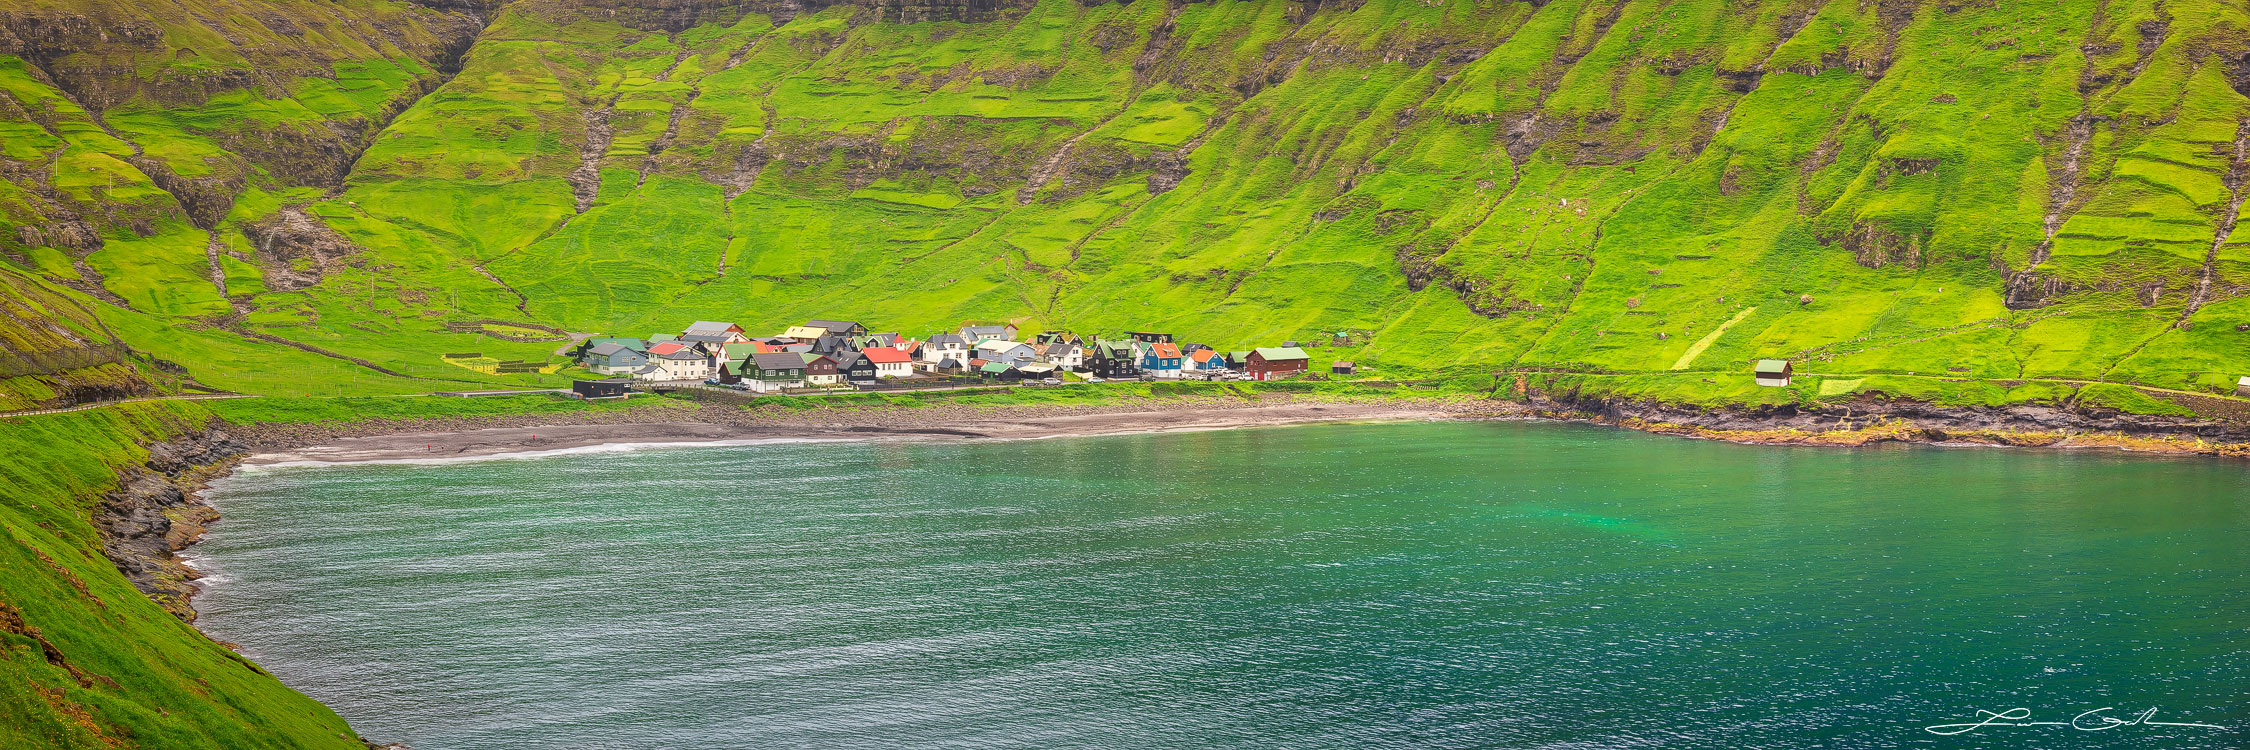 A fairytale looking like village nestled at the end of a fjord and surrounded by green lush mountains - Faroe Islands - Gintchin Fine Art